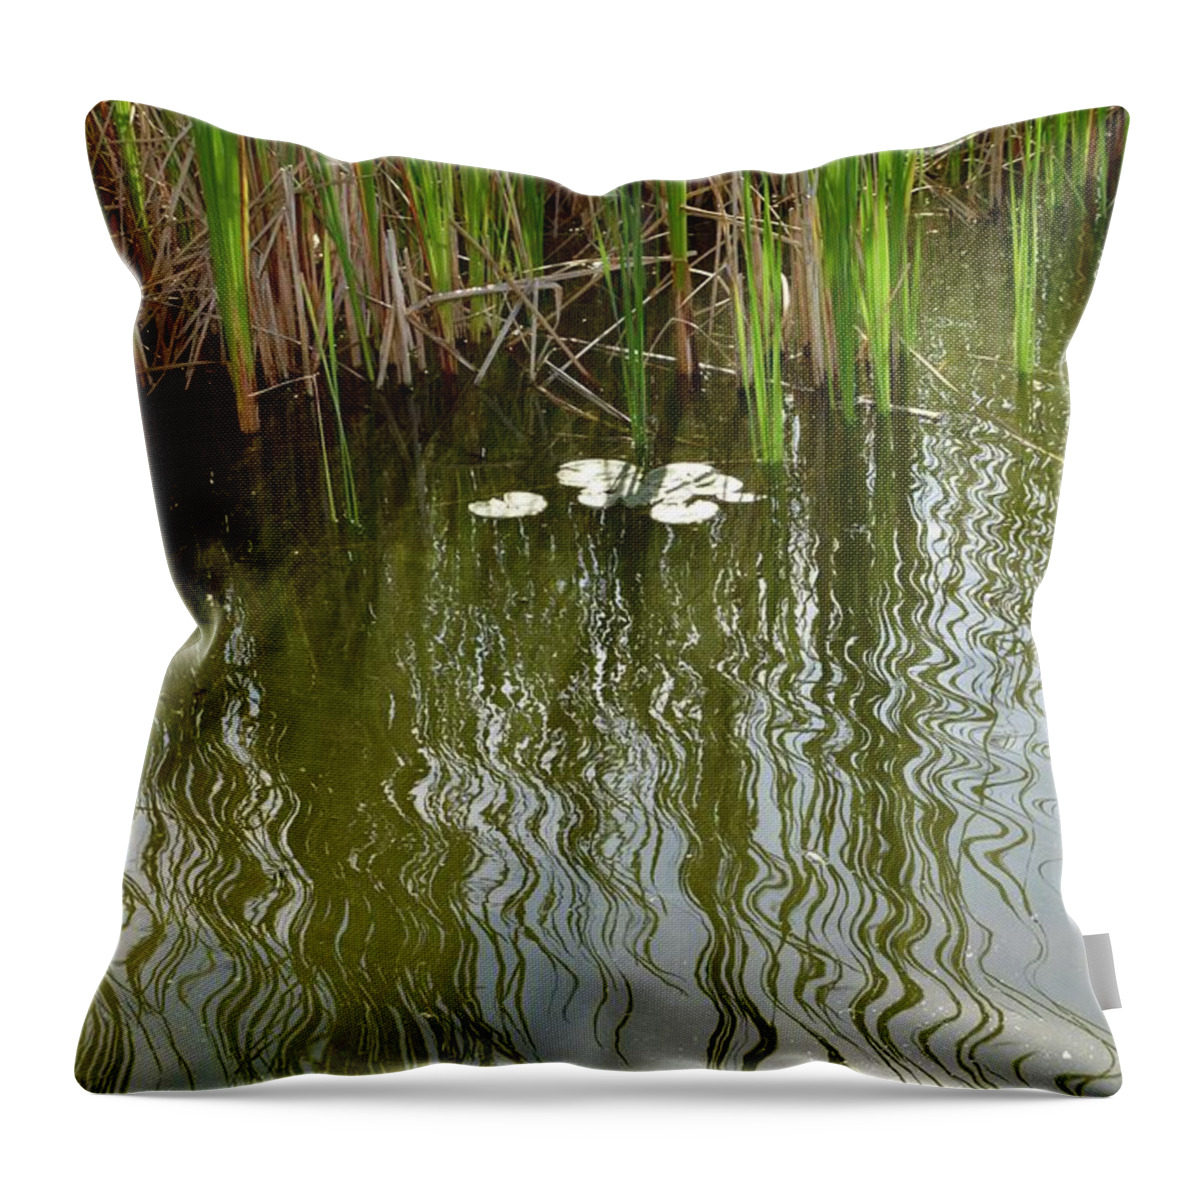 Water Throw Pillow featuring the photograph Reed Reflections by Linda L Brobeck